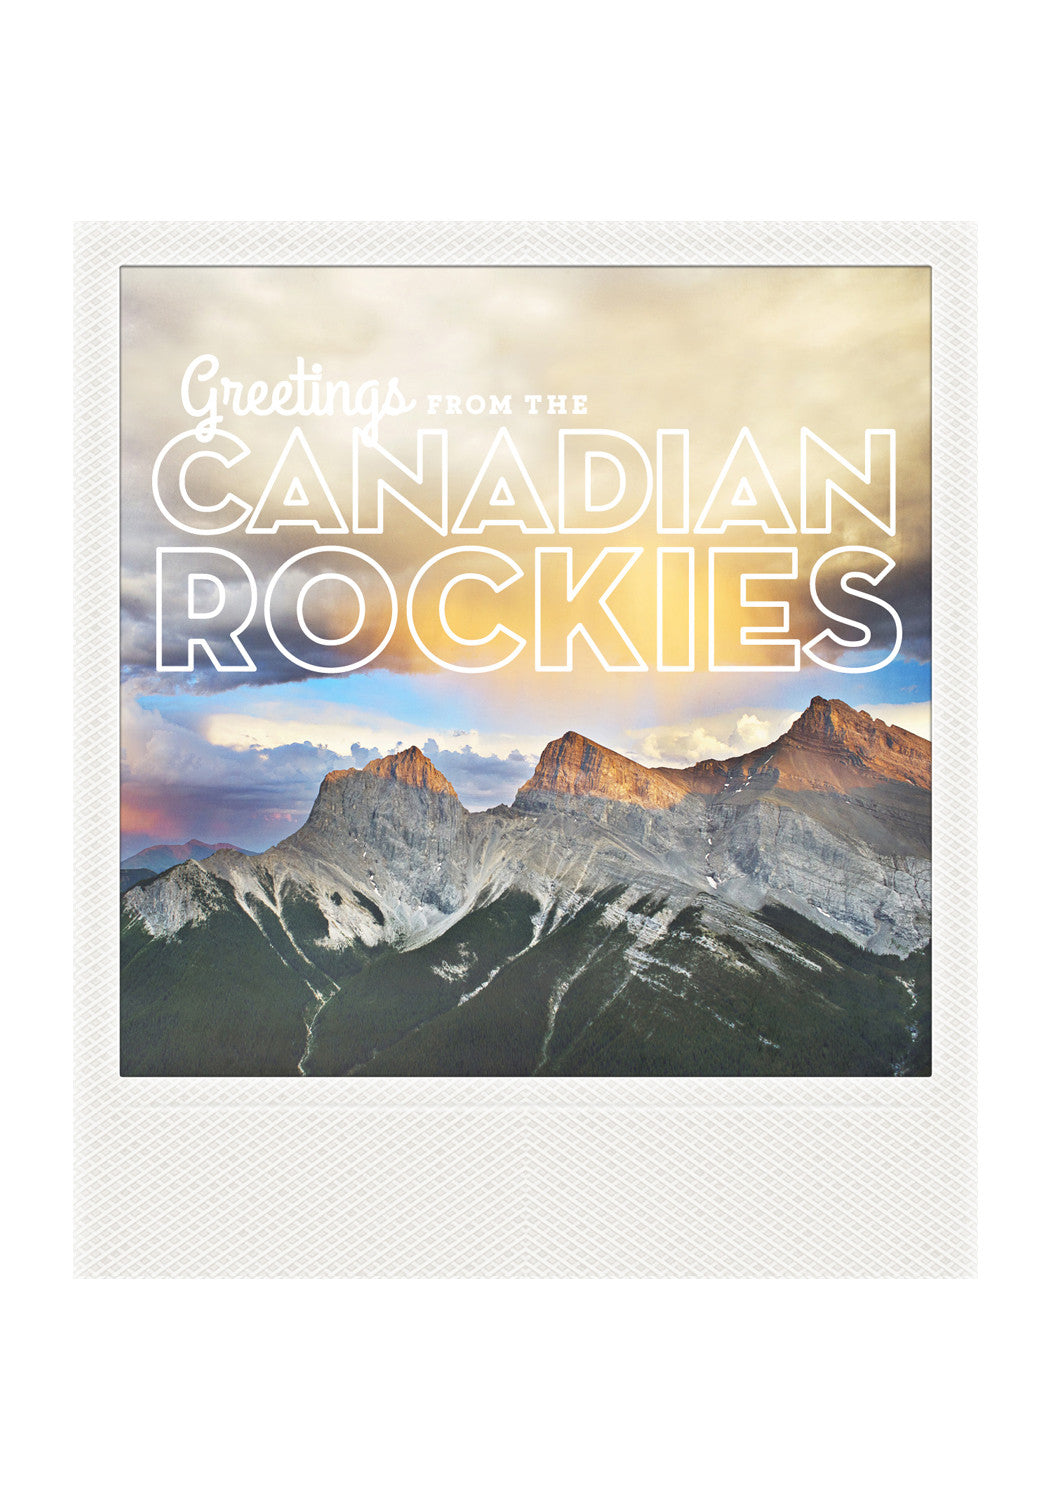 Metallic Polaroid Magnet <br> Greetings from The Canadian Rockies